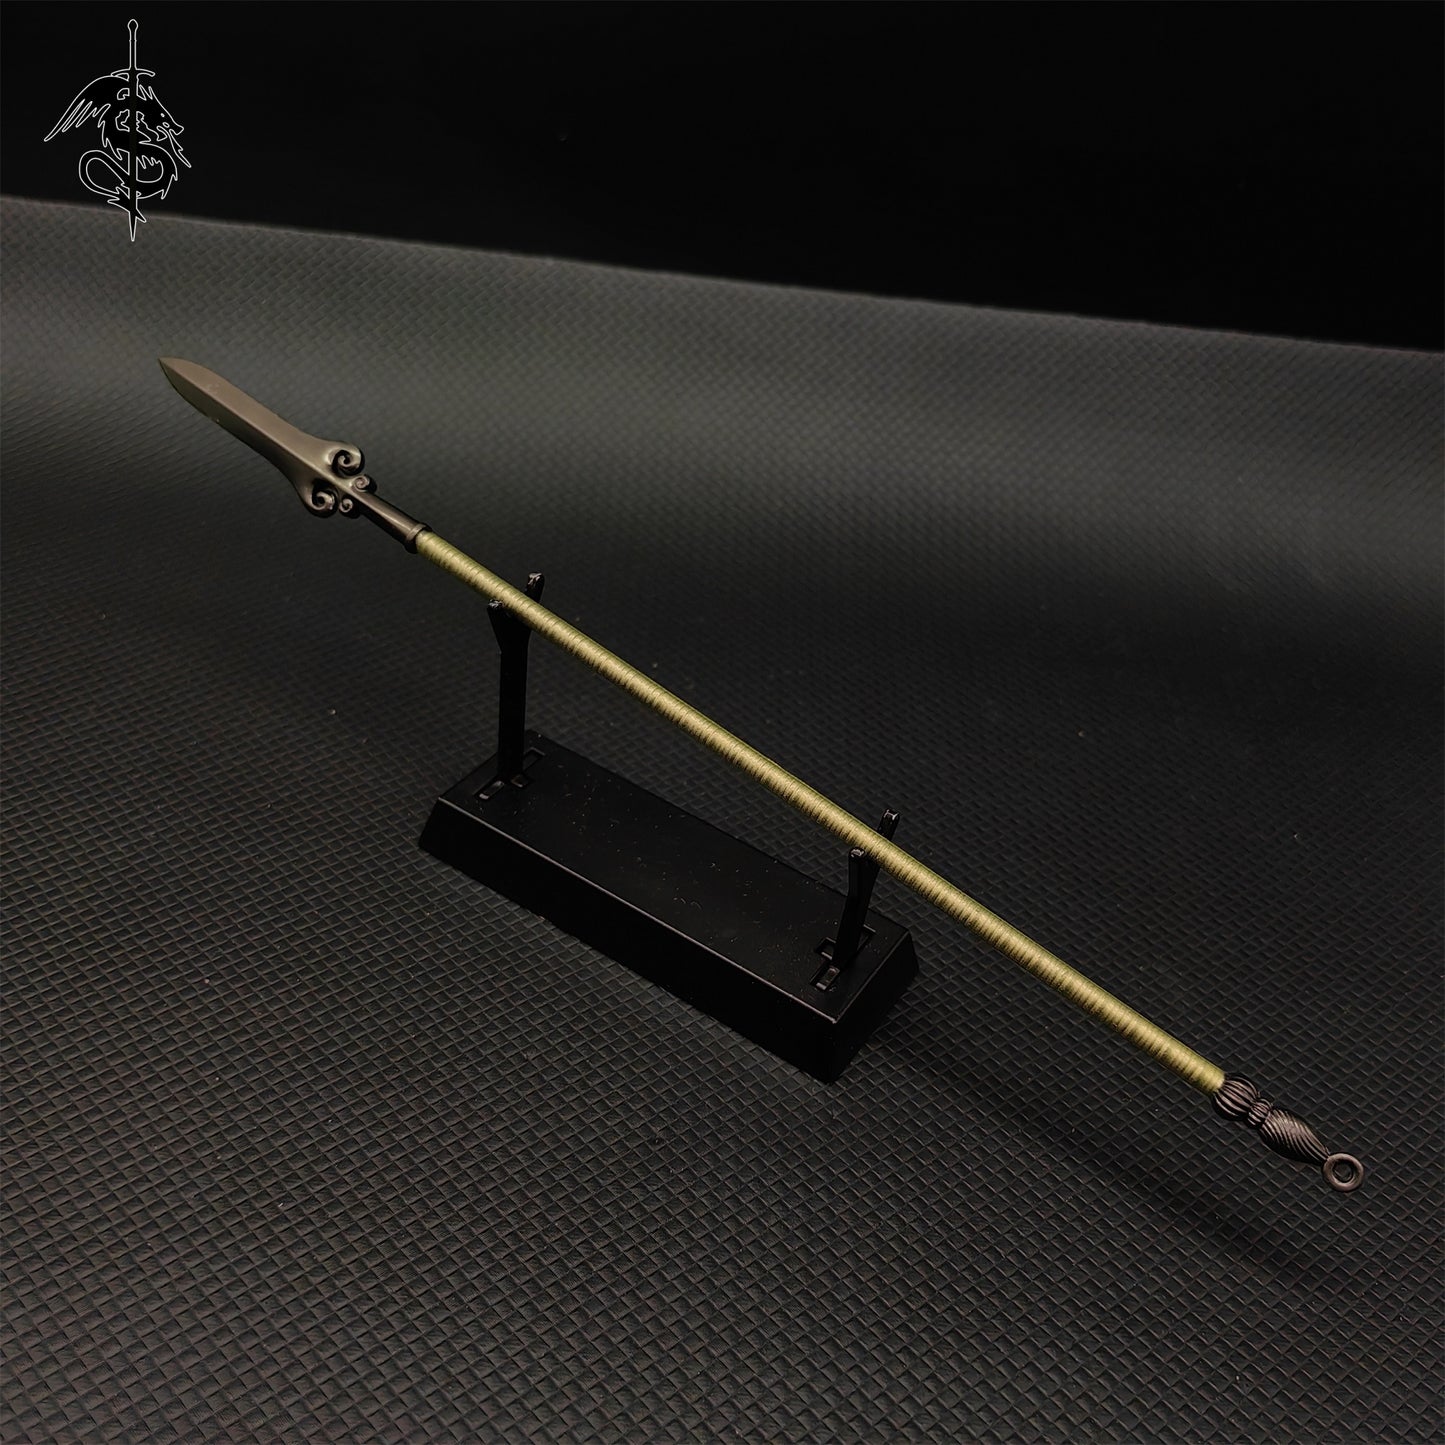 Ancient Chinese Long Spear Replica 22CM/8.7"